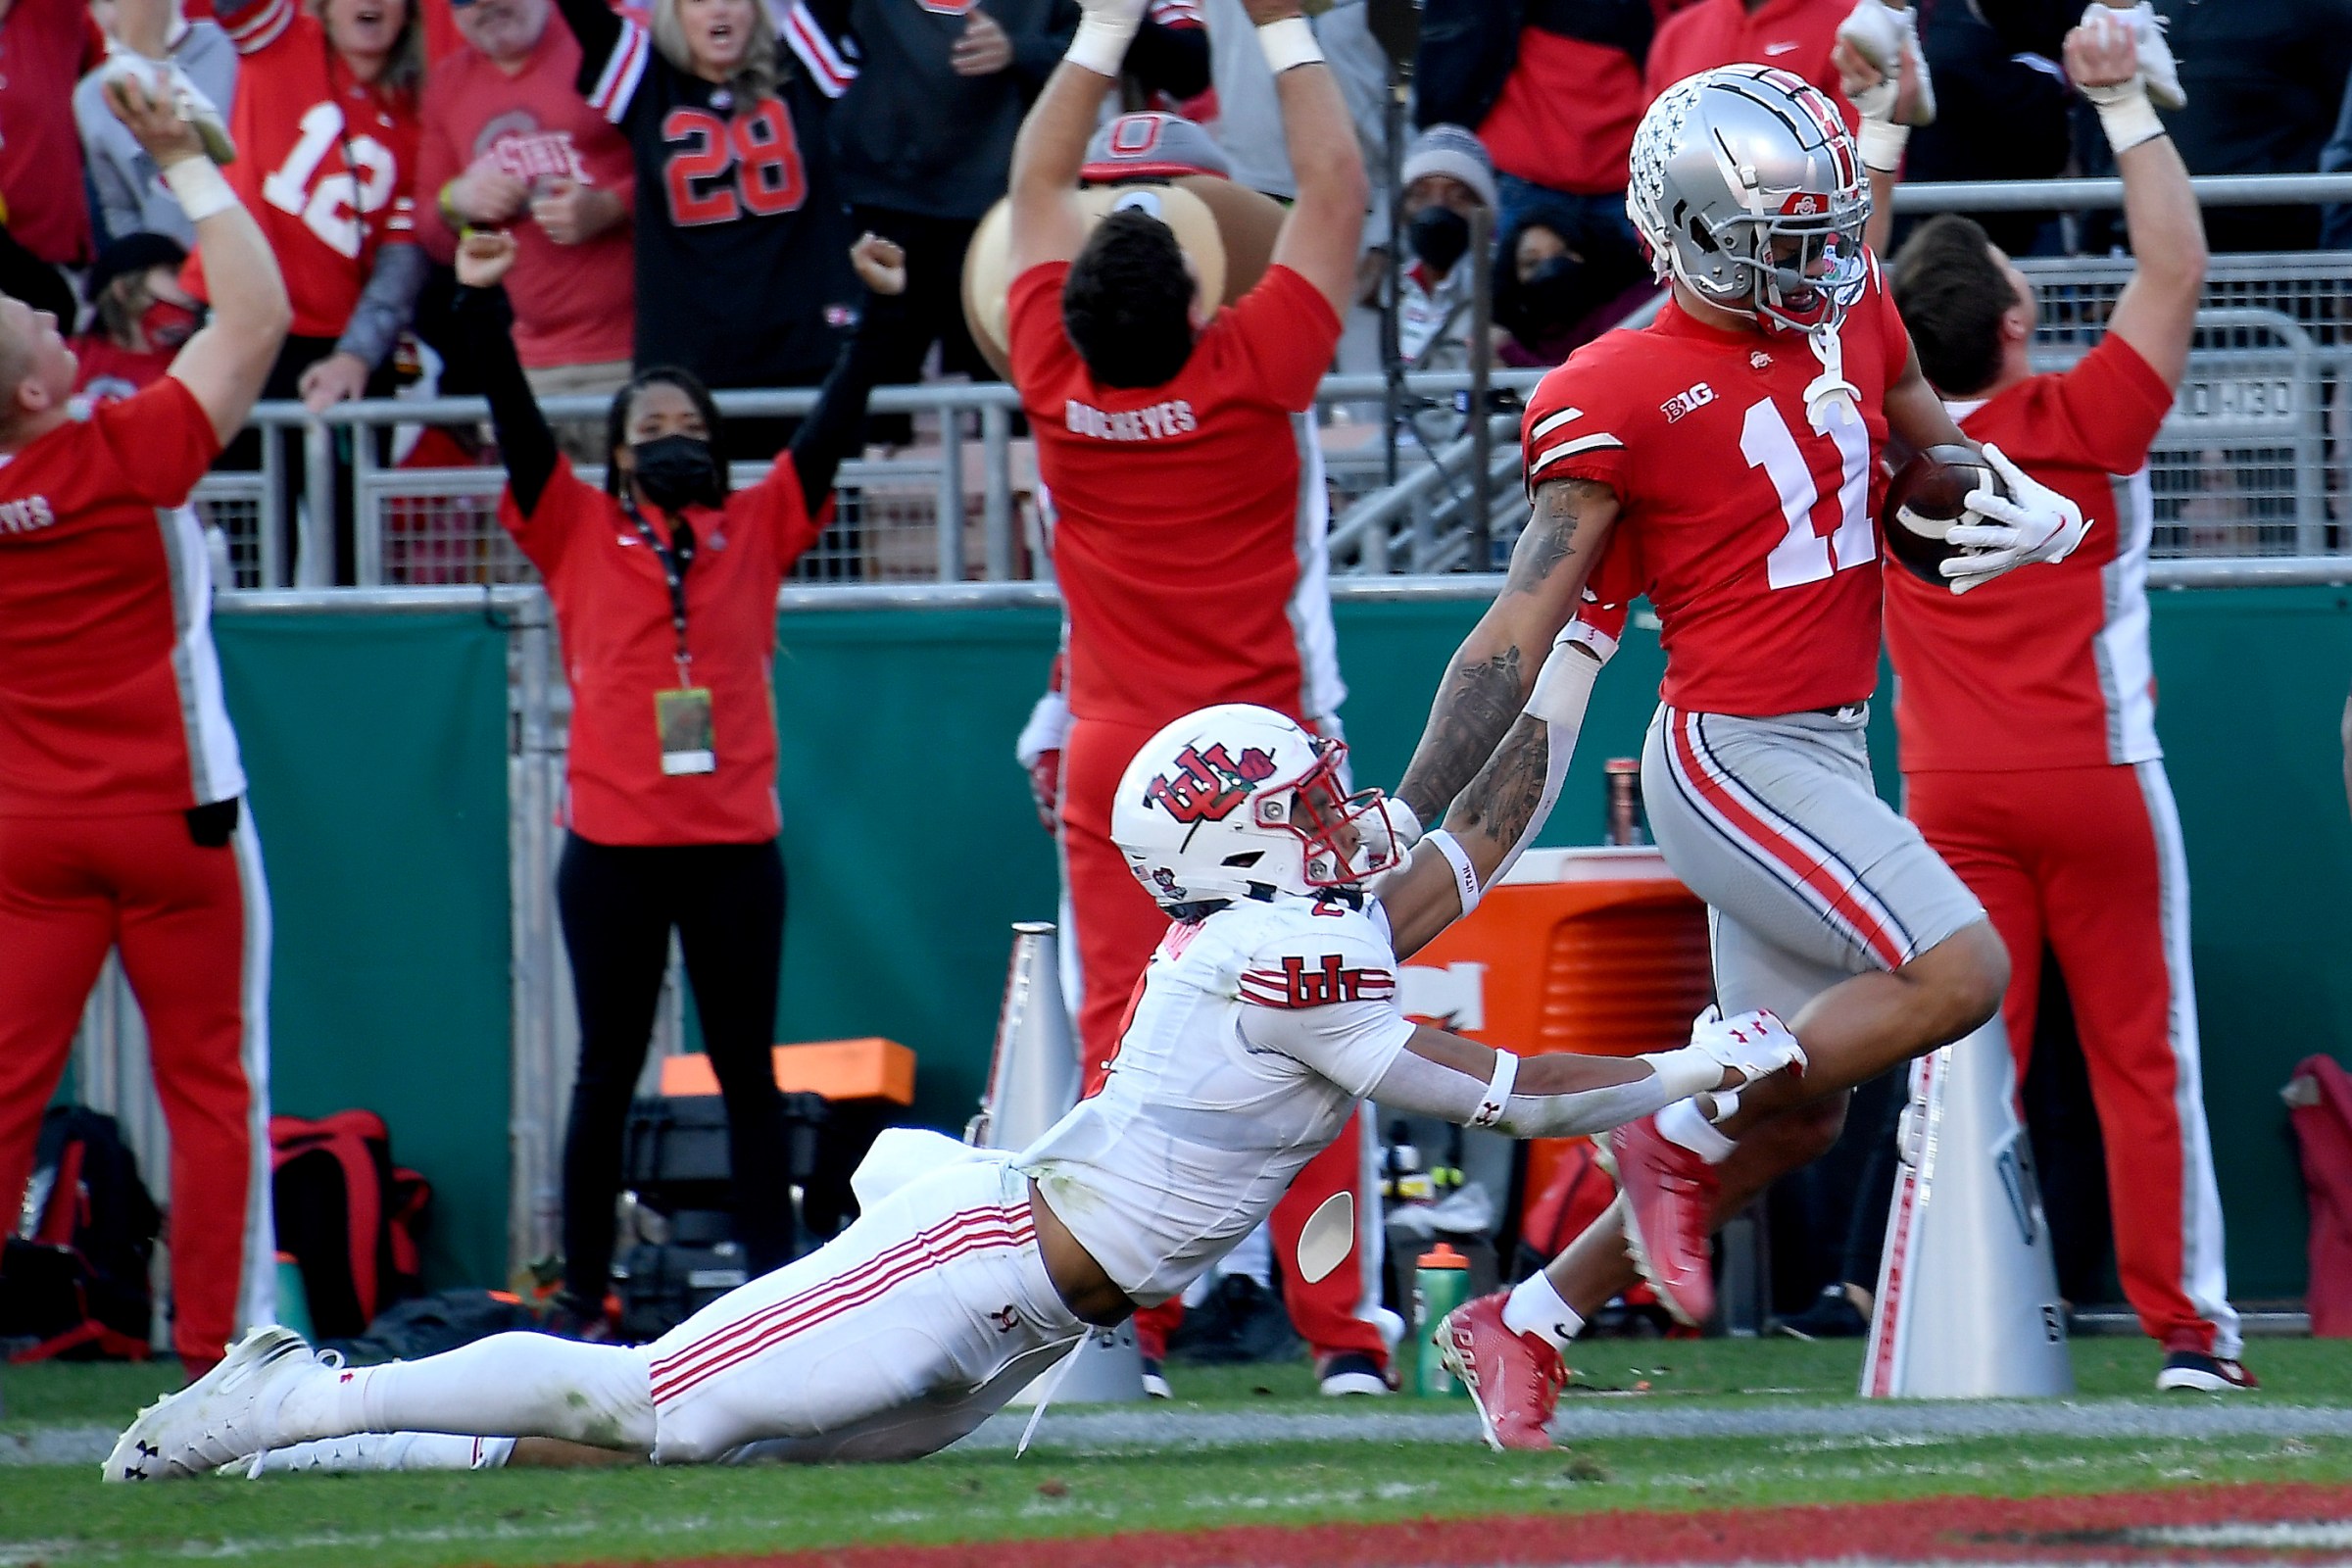 Jaxon Smith-Njigba #11 of the Ohio State Buckeyes scores a touchdown against the Utah Utes during the second quarter in the Rose Bowl Game at Rose Bowl Stadium on January 01, 2022 in Pasadena, California.